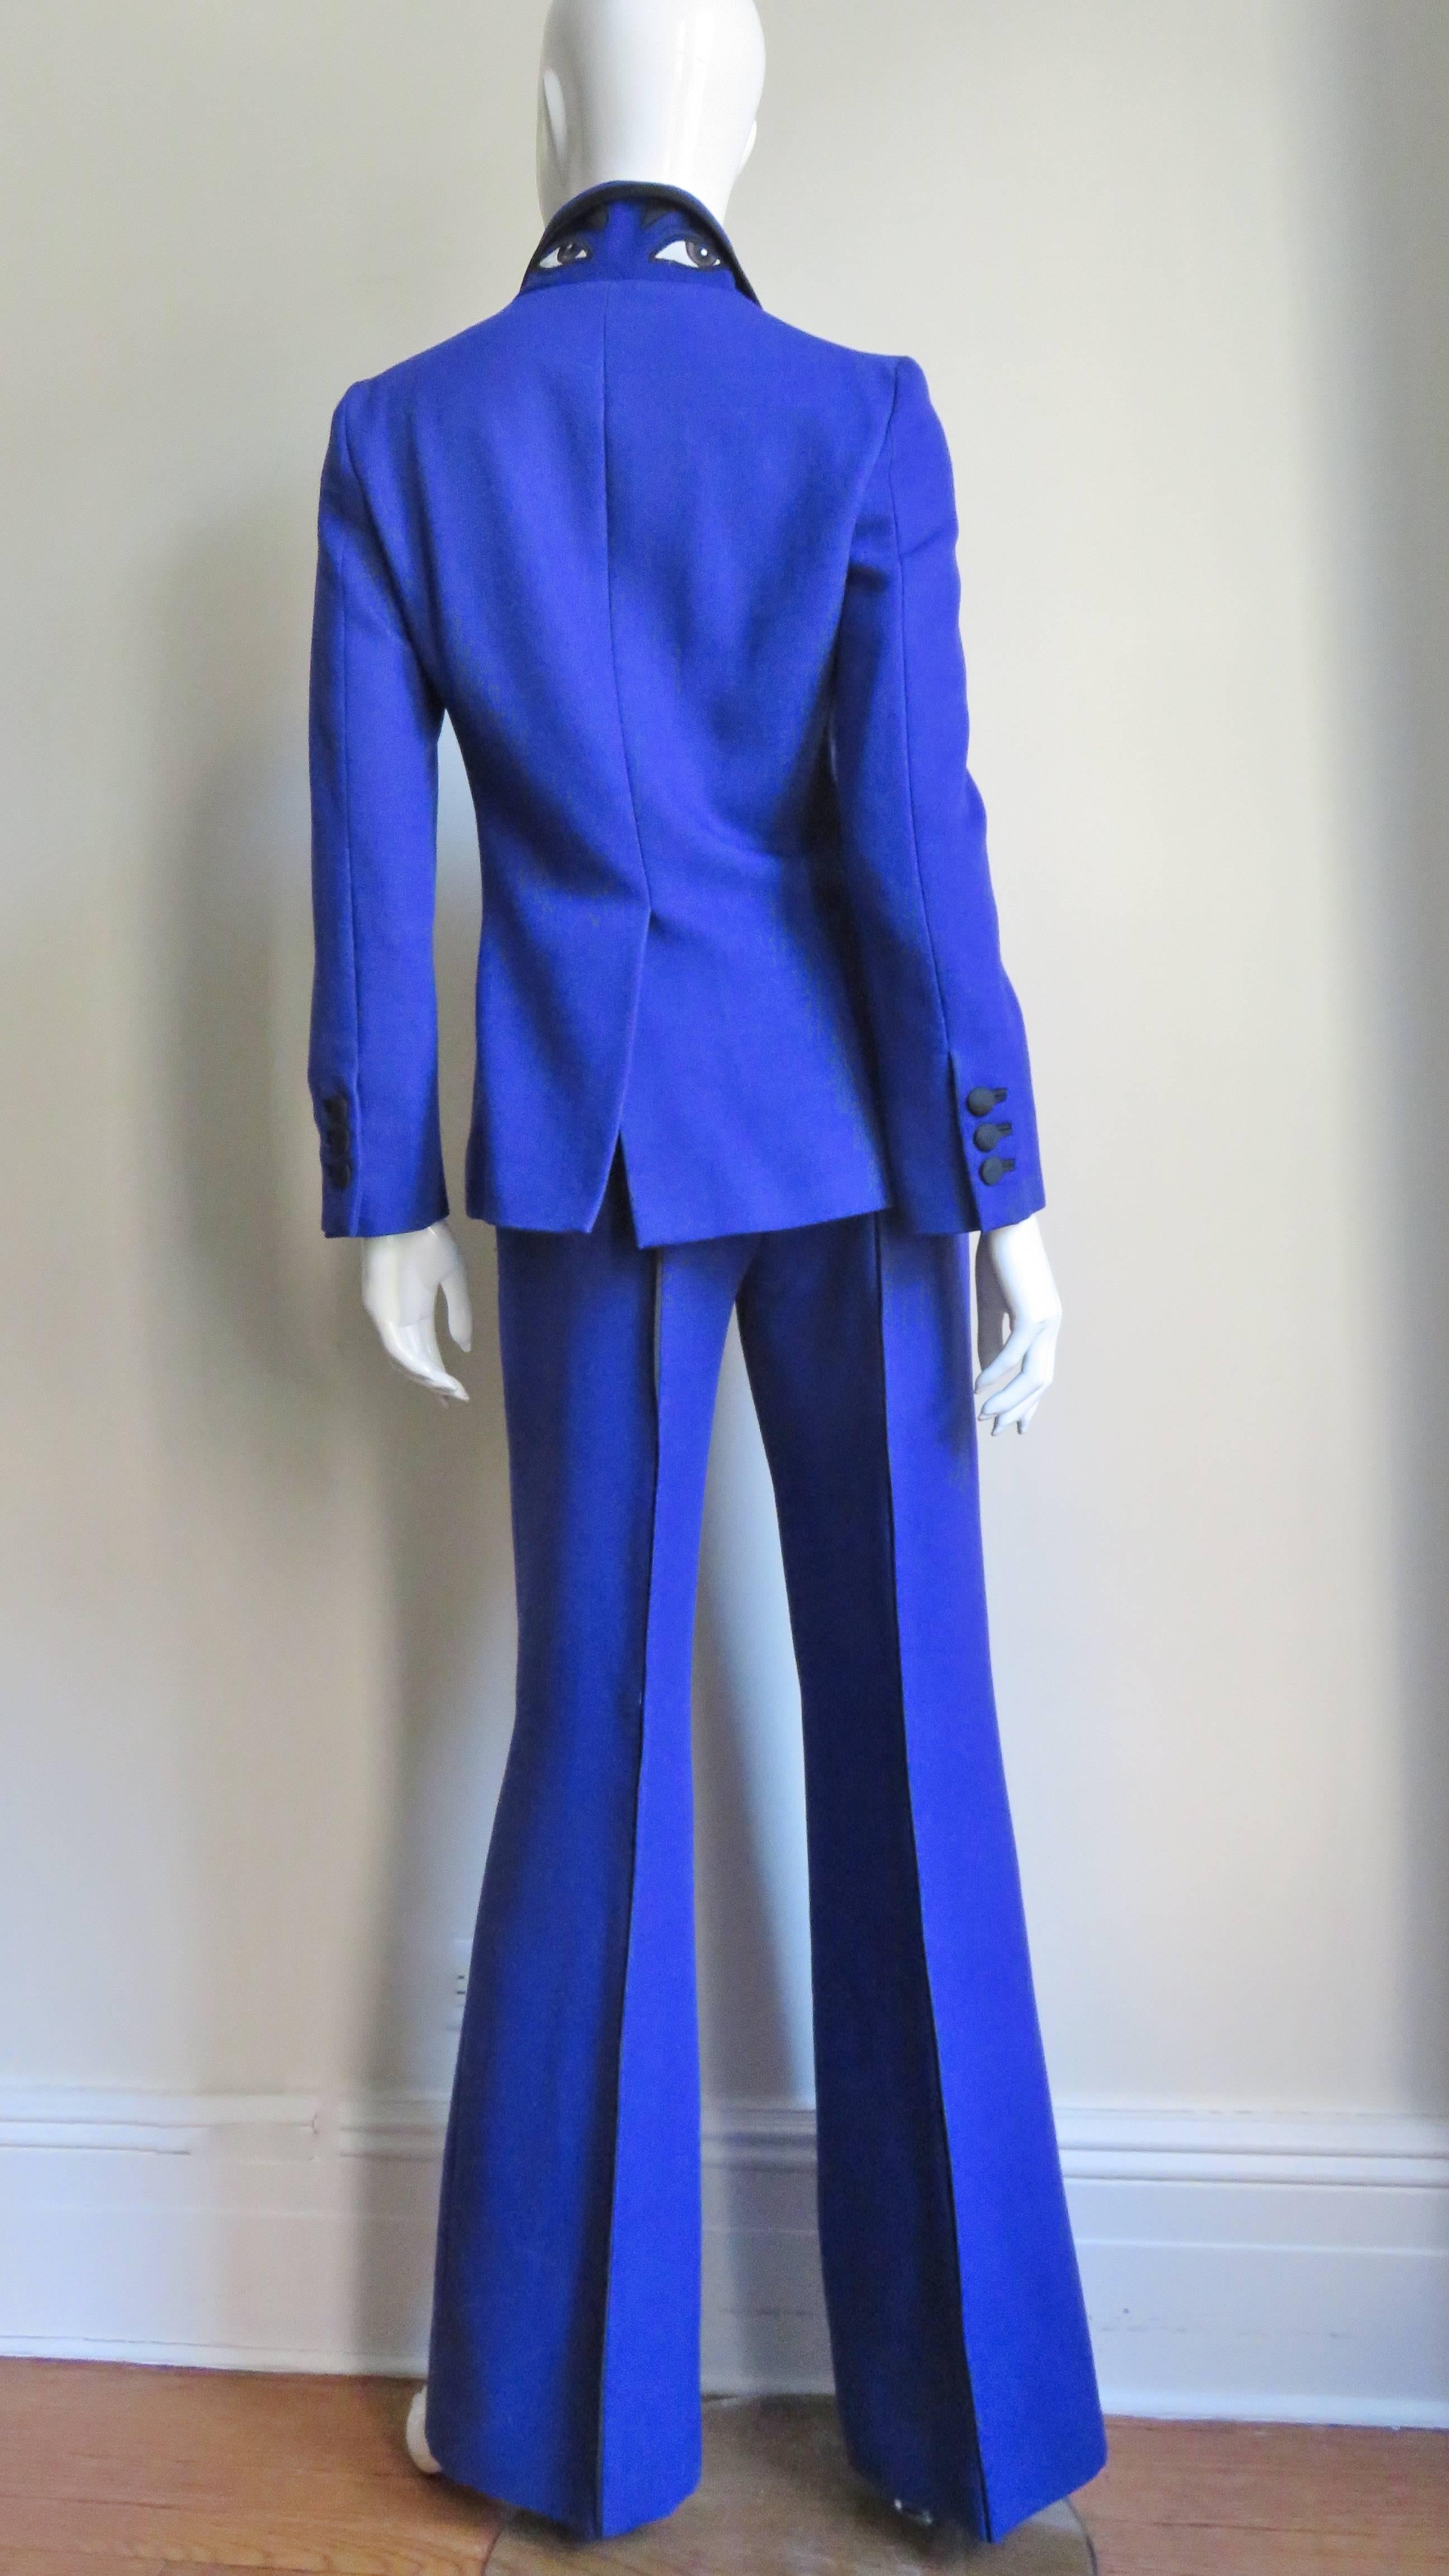 Moschino Color Block Pantsuit with Applique Eyes Collar For Sale 3